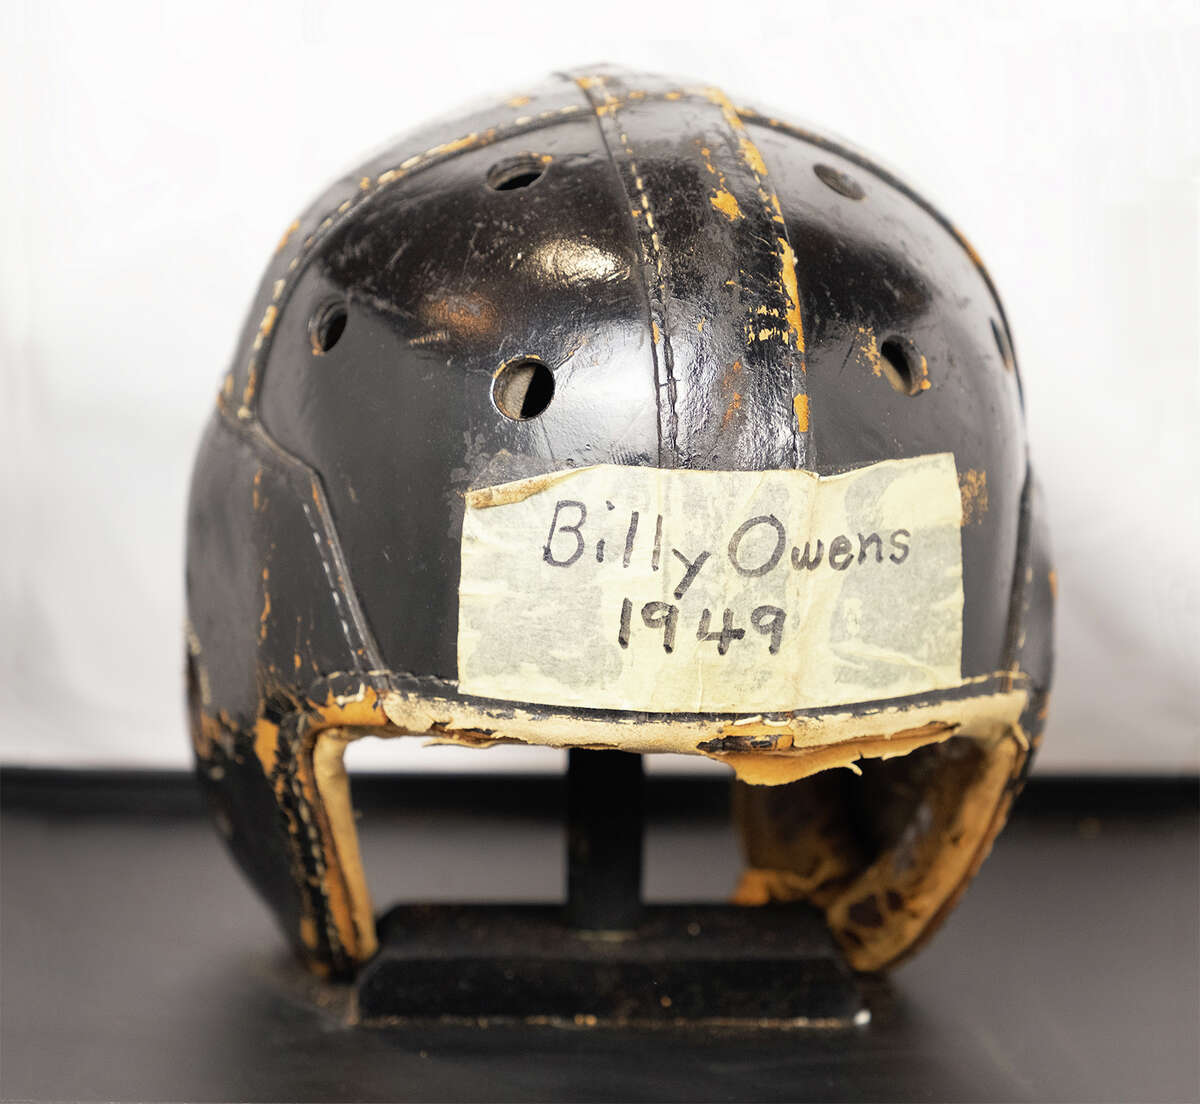 Billy Owens' helmet on display at the Thursday Night Lights exhibit at the Bryan Museum in Galveston